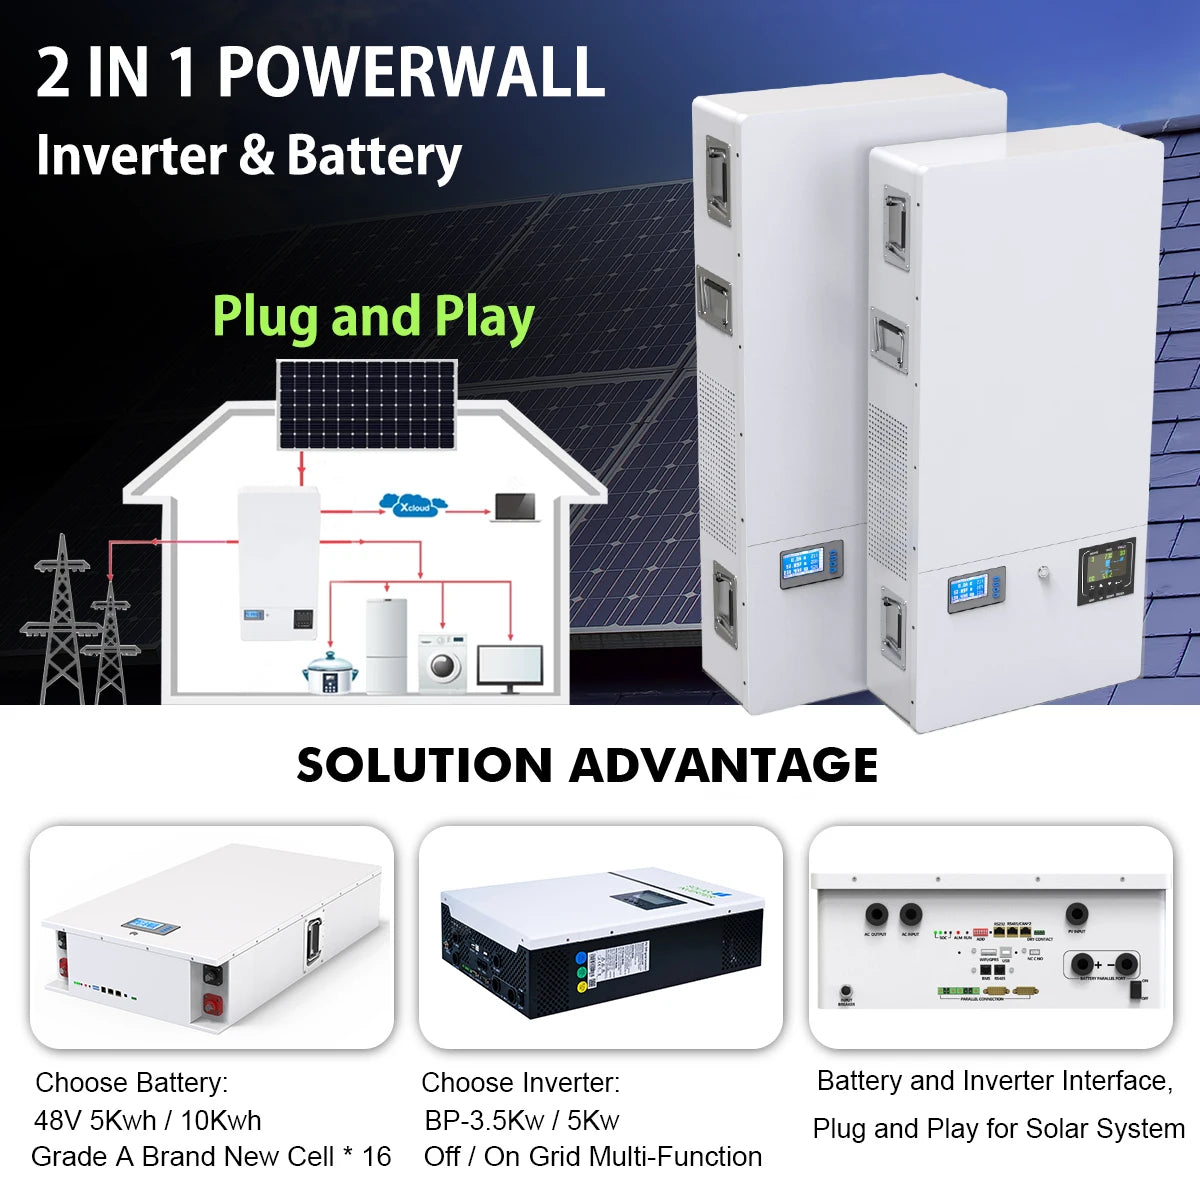 48V 200Ah LiFePO4 Powerwall Battery, Plug-and-play solar solution with battery and inverter for off-grid or grid-tied systems.